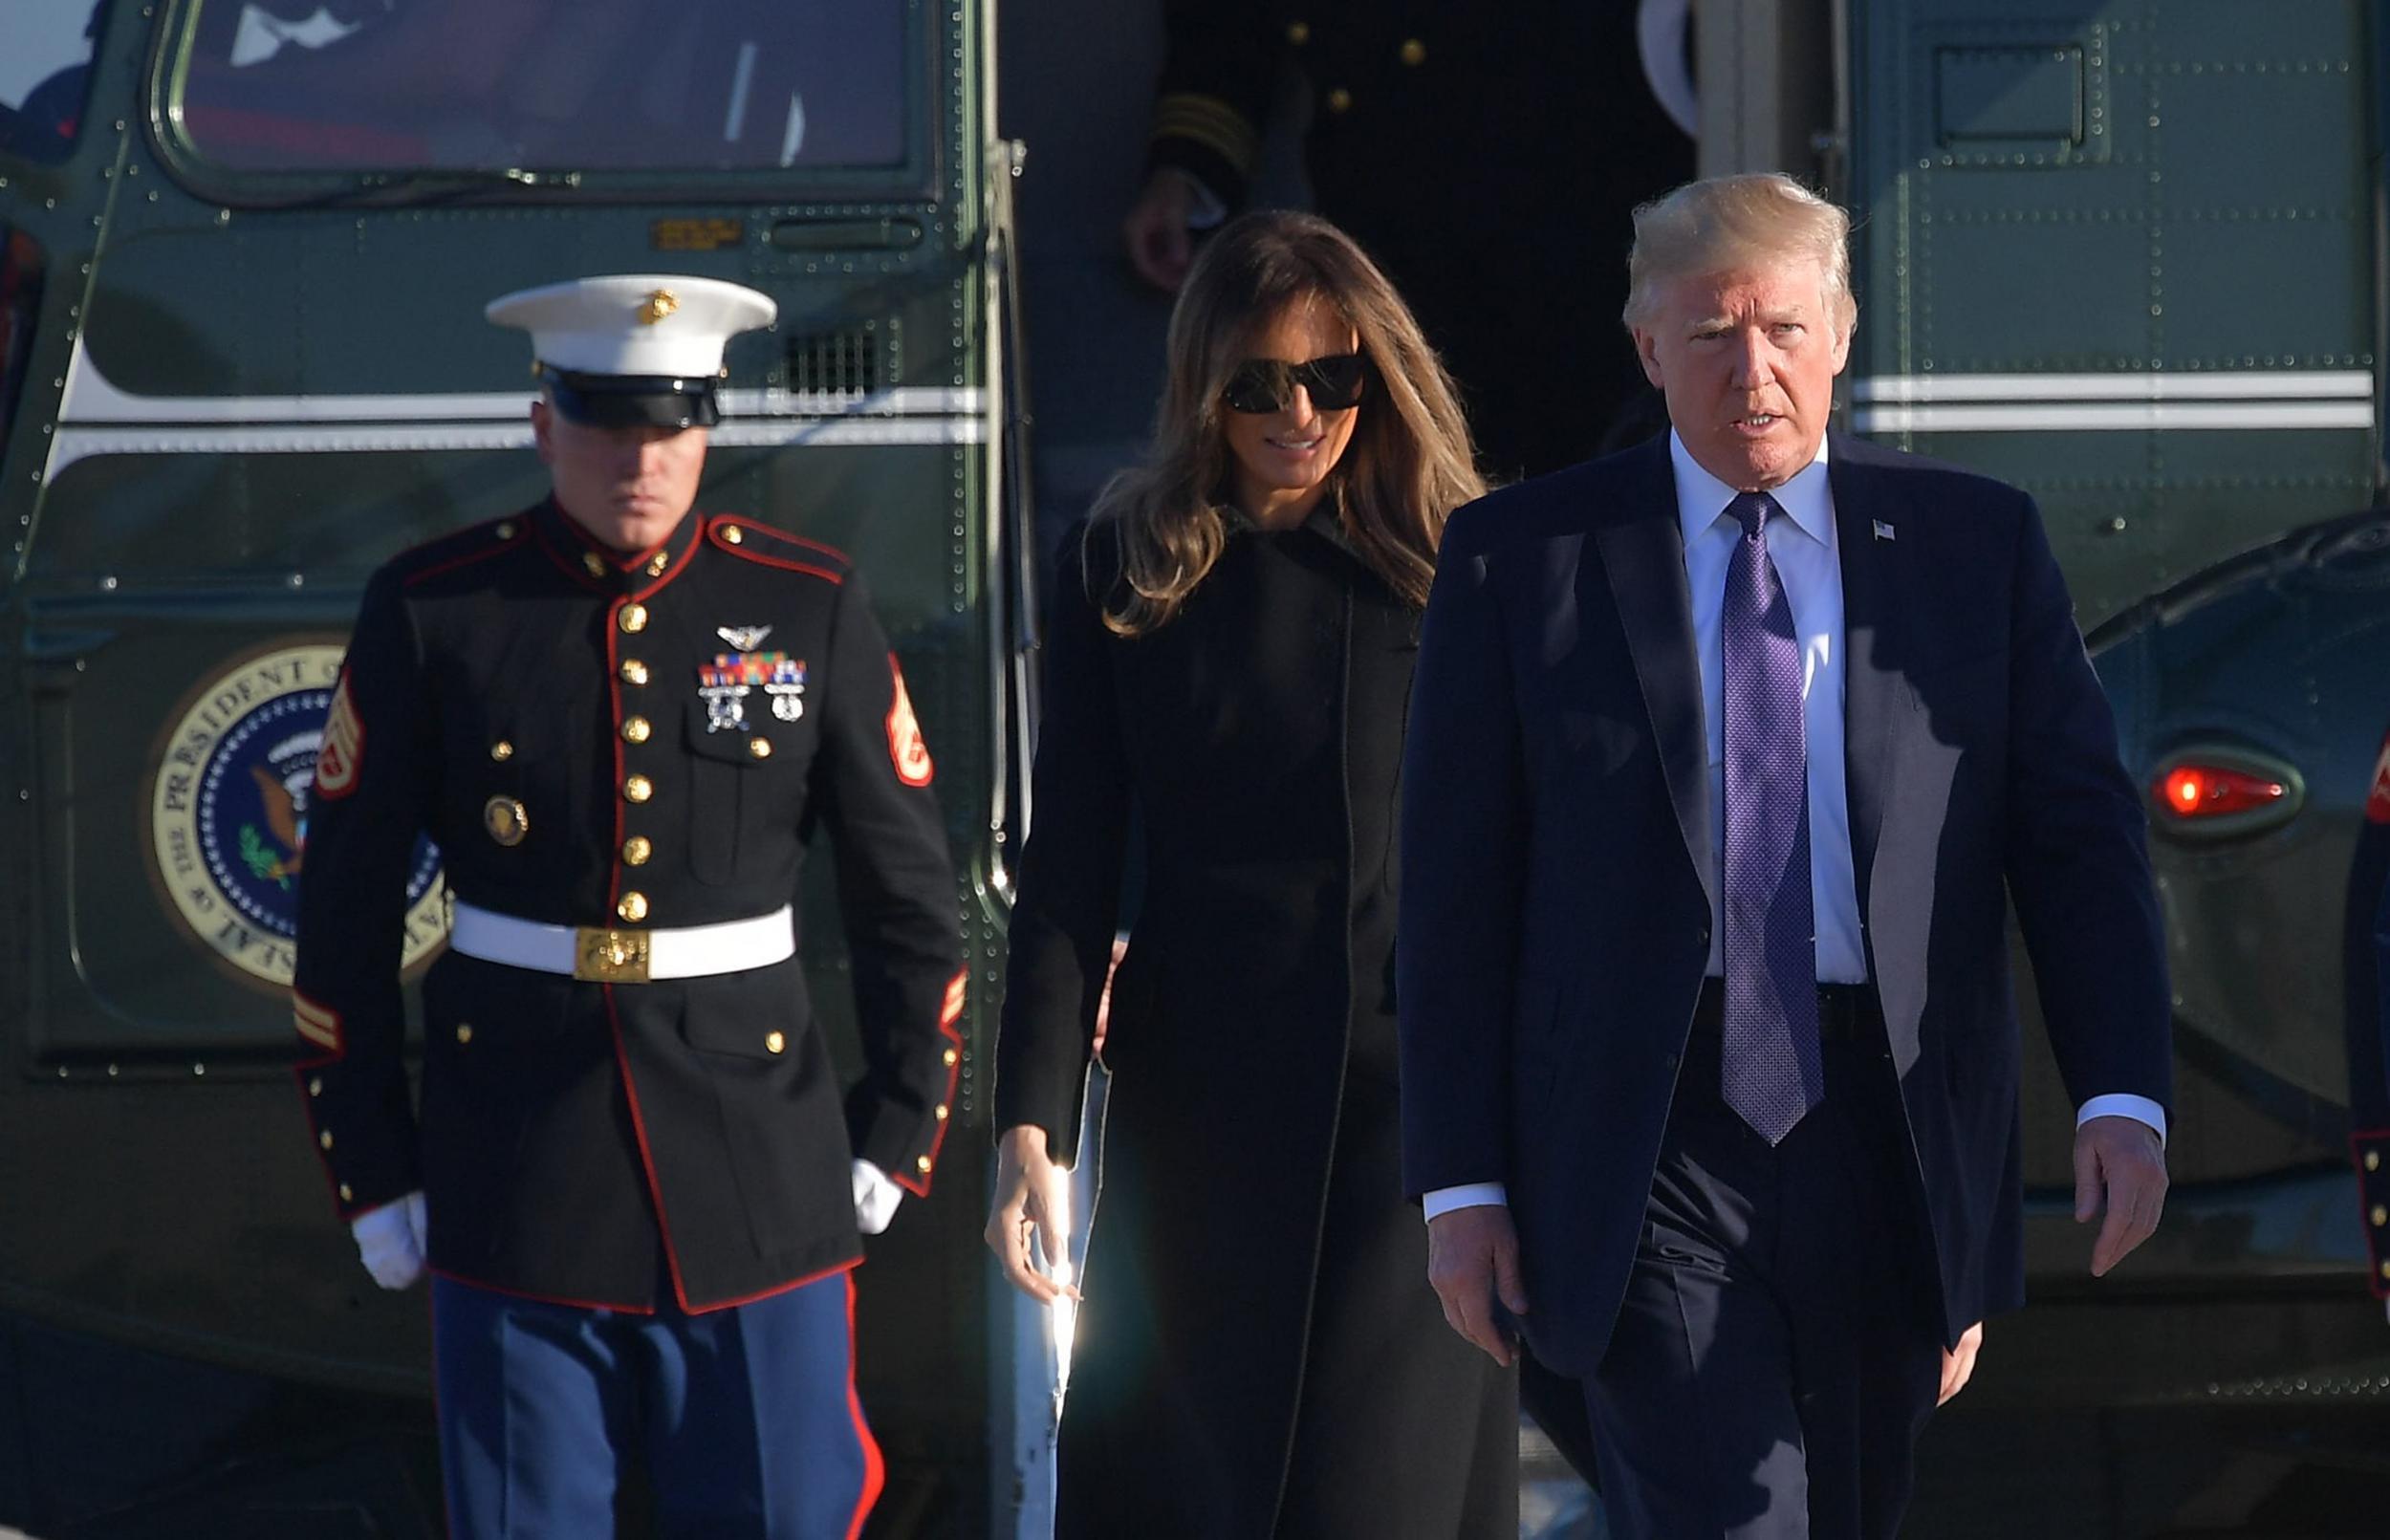 Donald Trump and Melania Trump make their way to board Air Force One before departing for Las Vegas